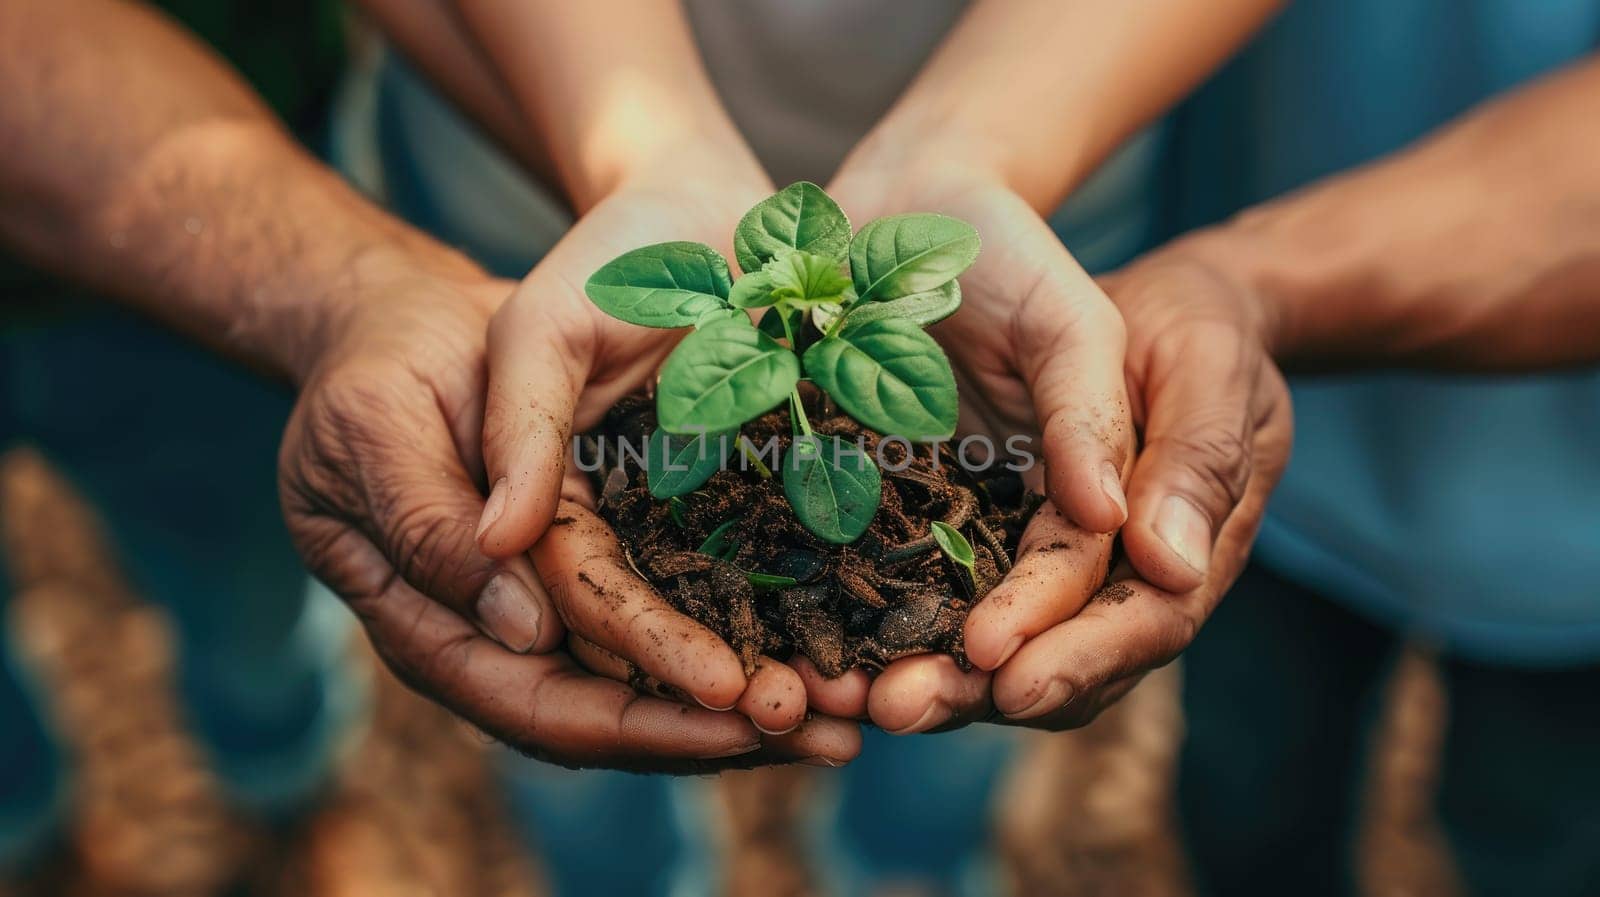 Community Growth, Close-up of Diverse Hands Holding a Small Seedling for Planting Together..